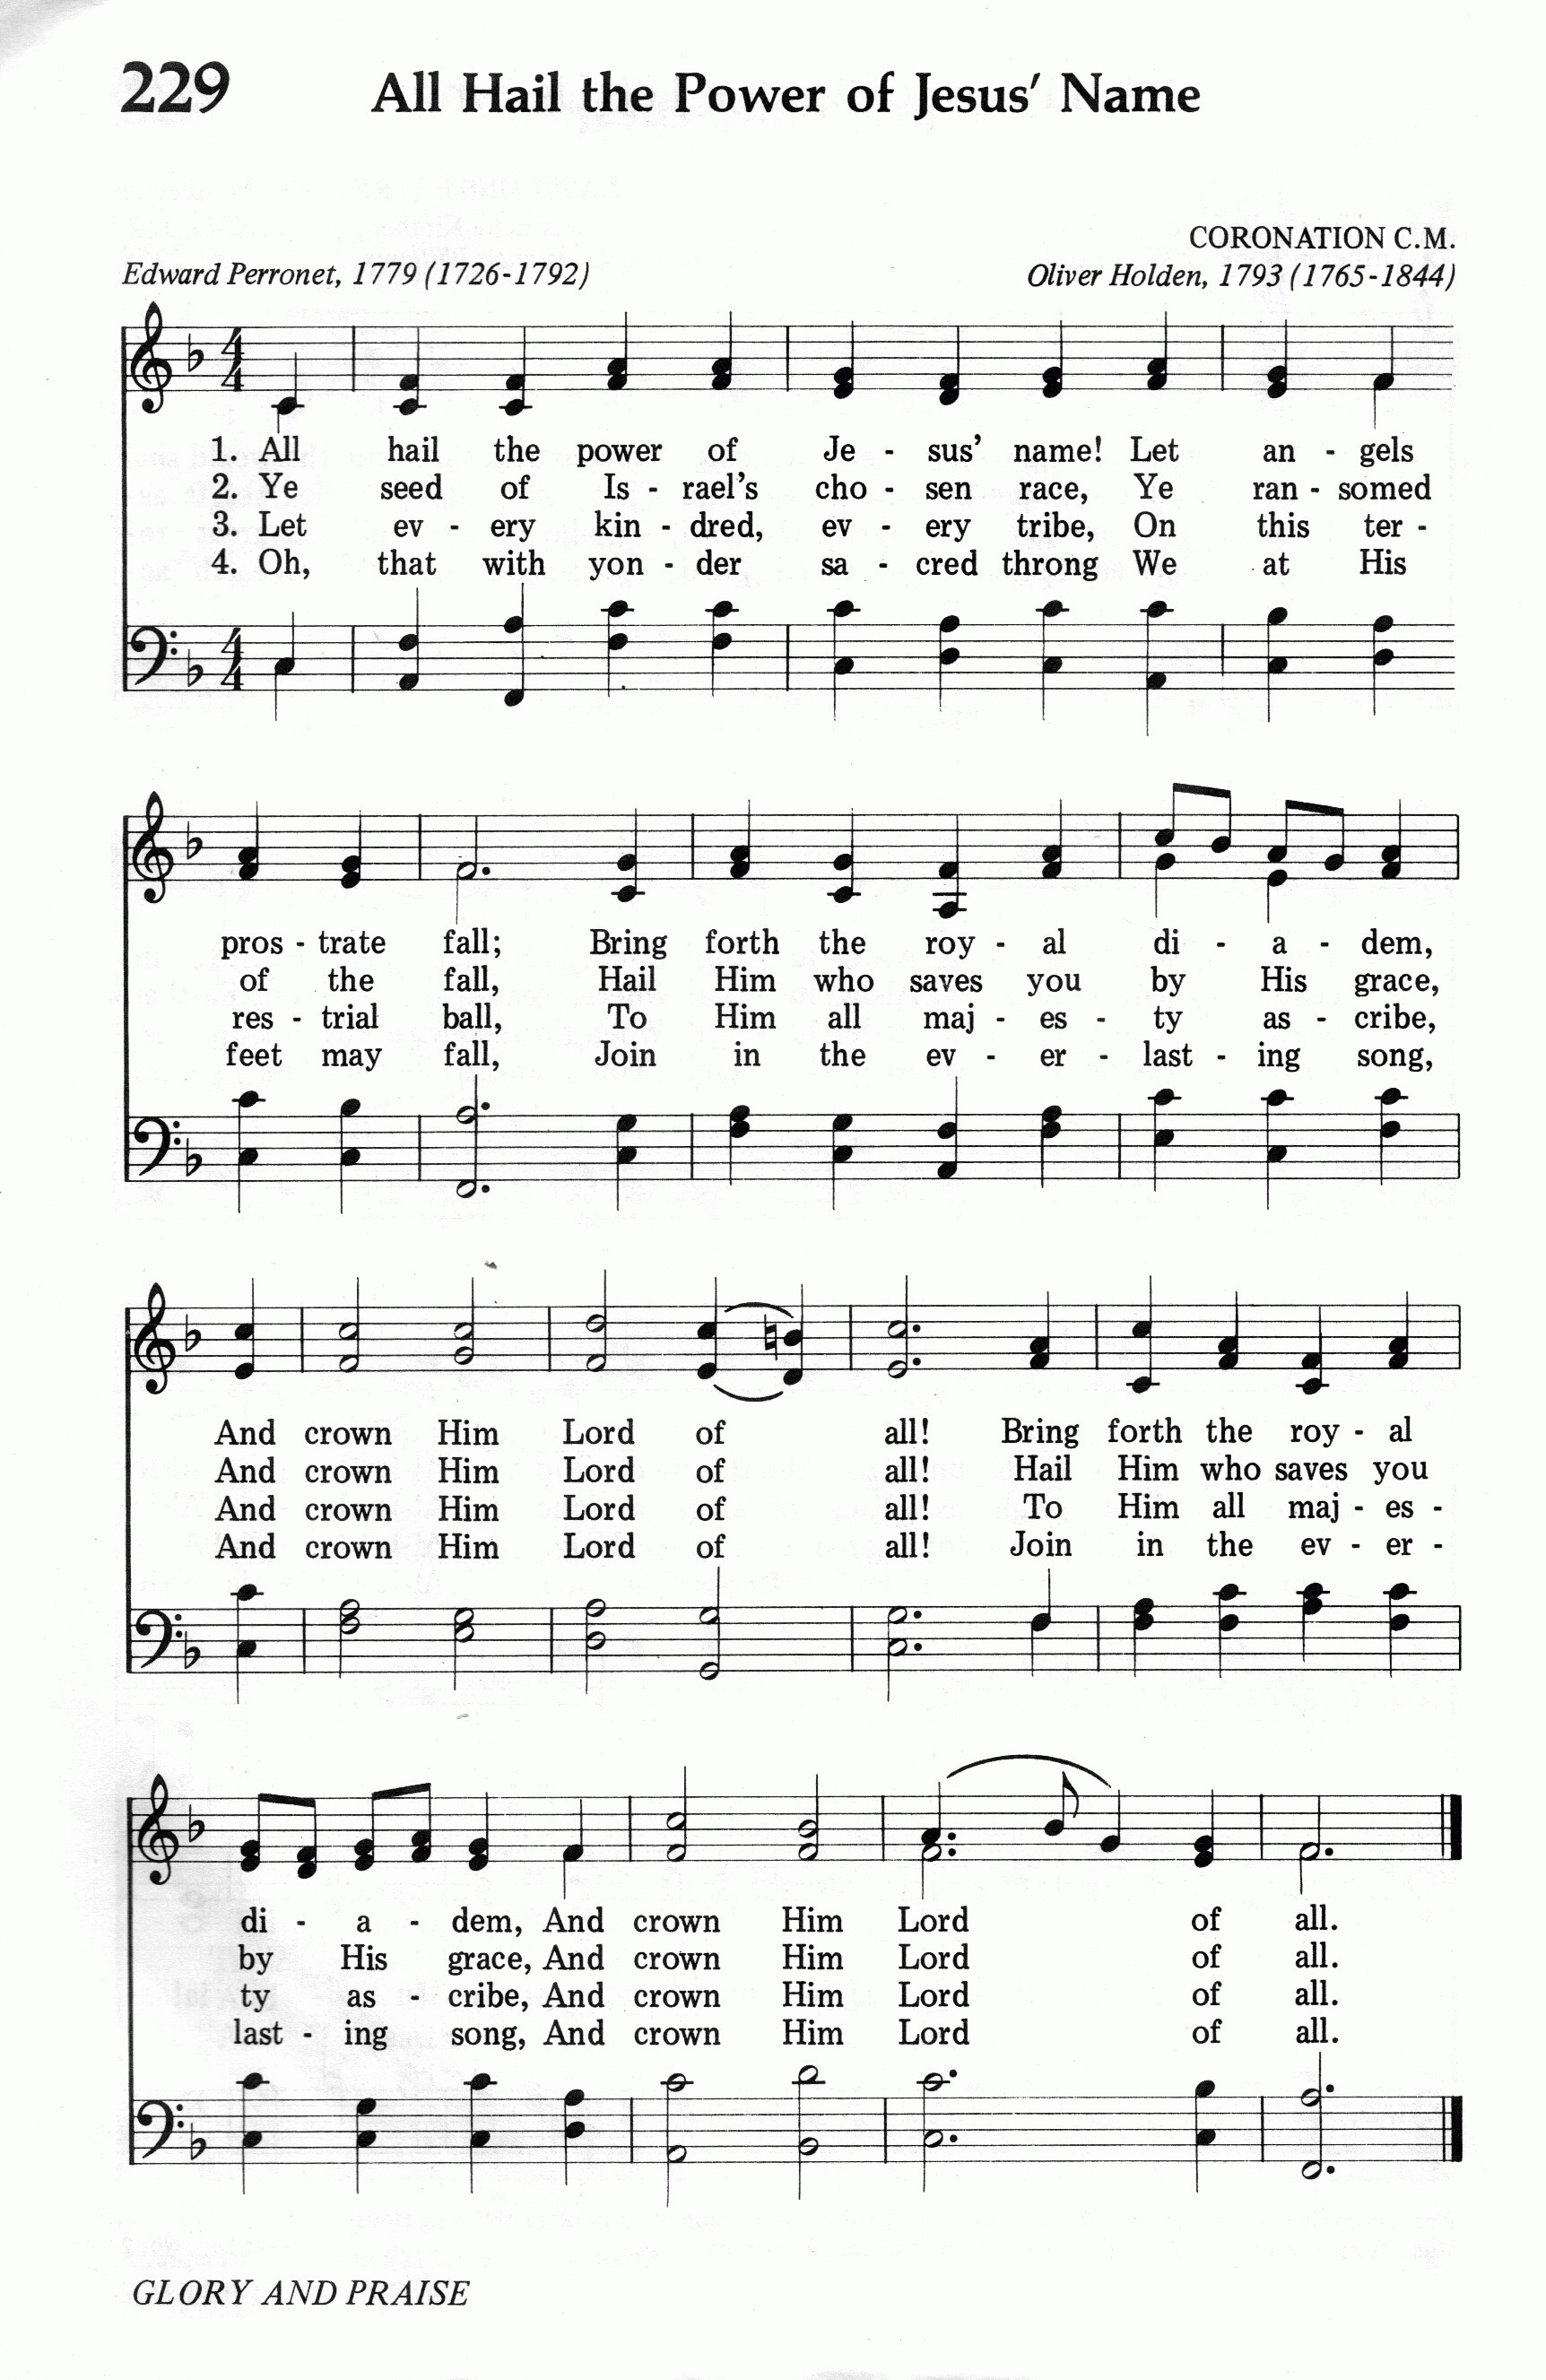 229.All Hail the Power of Jesus' Name-695HYMN